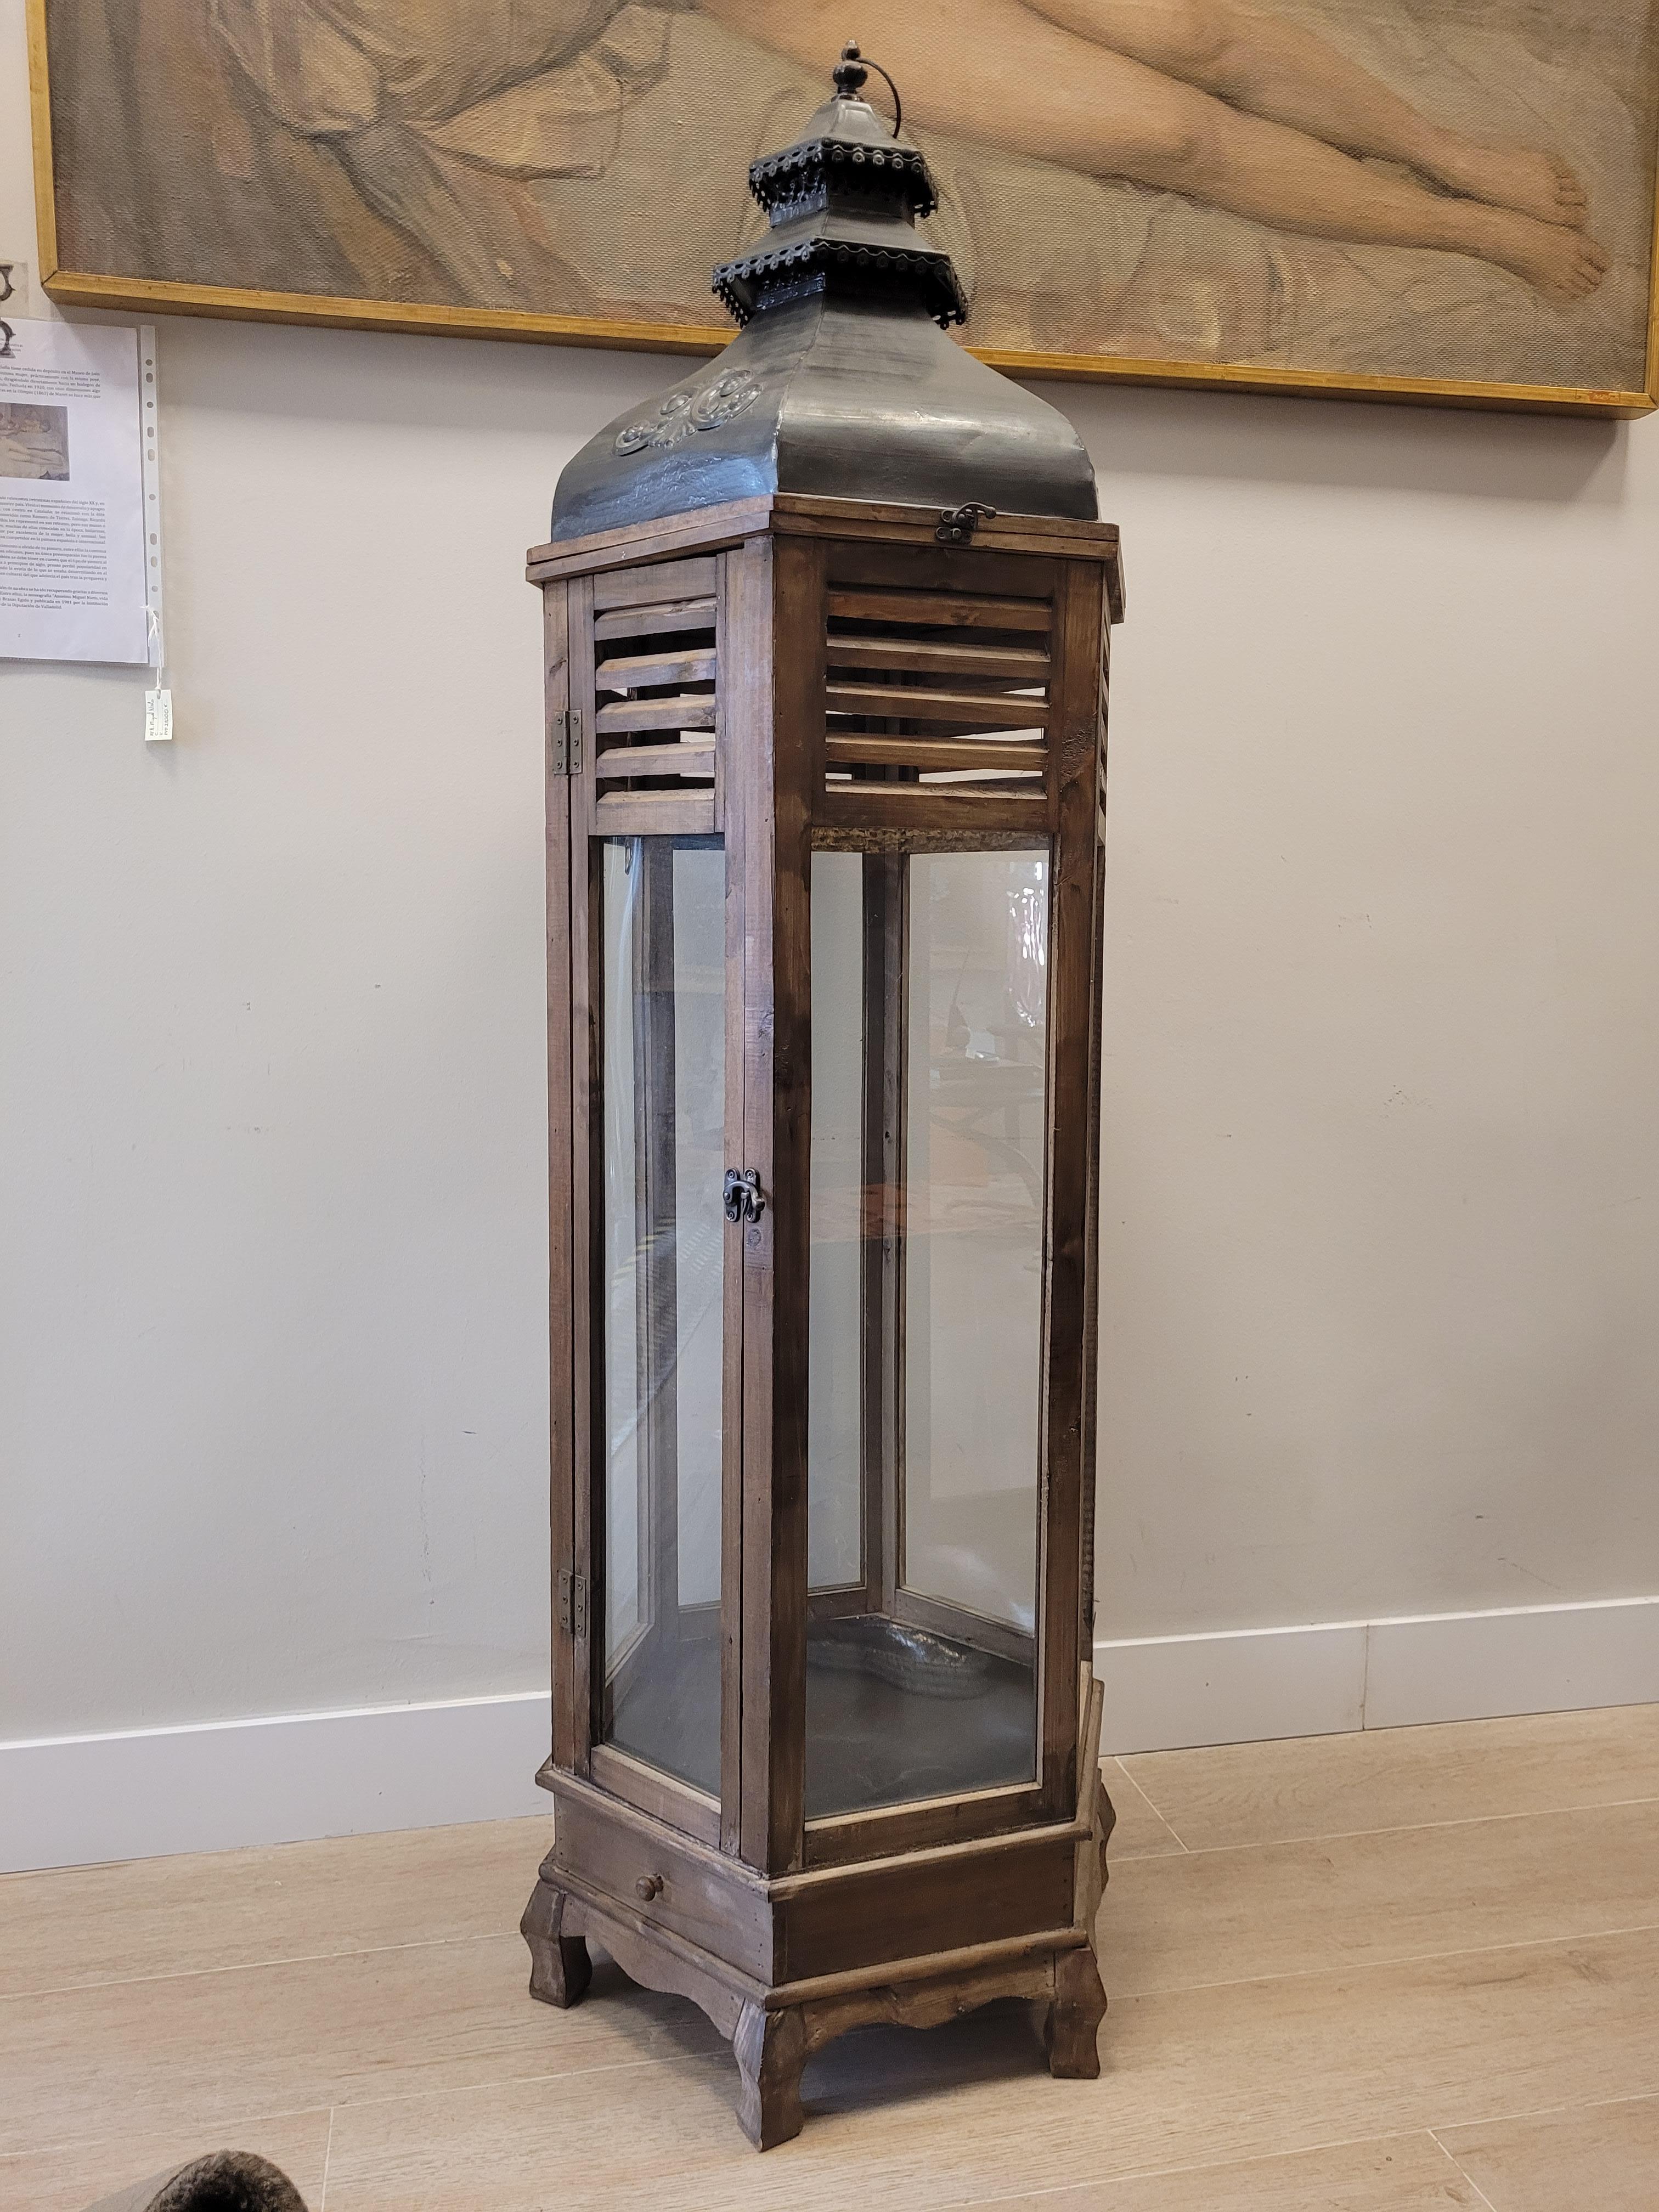 Amazing French lantern or photophore, in the French Provencal style but made in the 20th century.
A large size and beauty characterizes this photophore, in the shape of a house, with faceted and profiled wooden walls with glass, it opens with a door